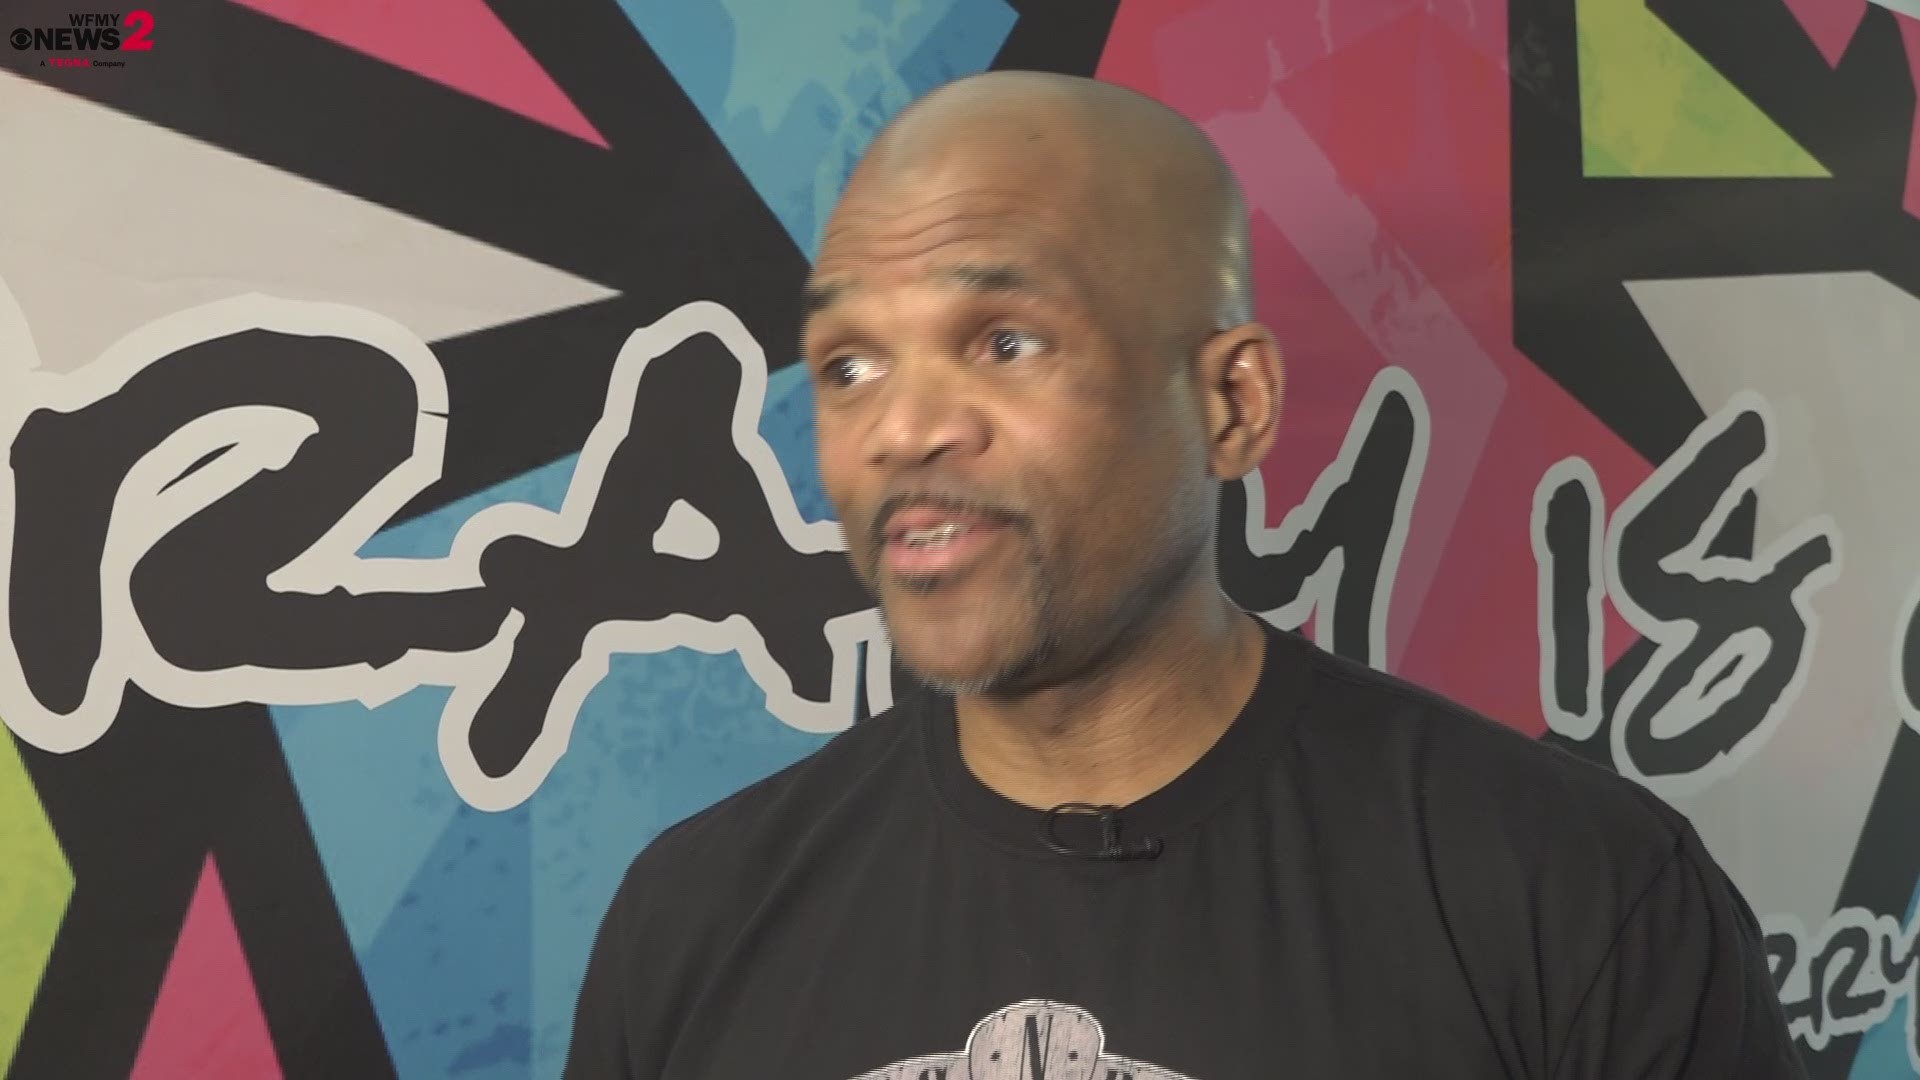 Darryl McDaniels, known for his stage name DMC of Run-DMC, visits Greensboro to speak about mental health at Sanctuary House's The Like, Totally 80s Dance Party fundraiser.